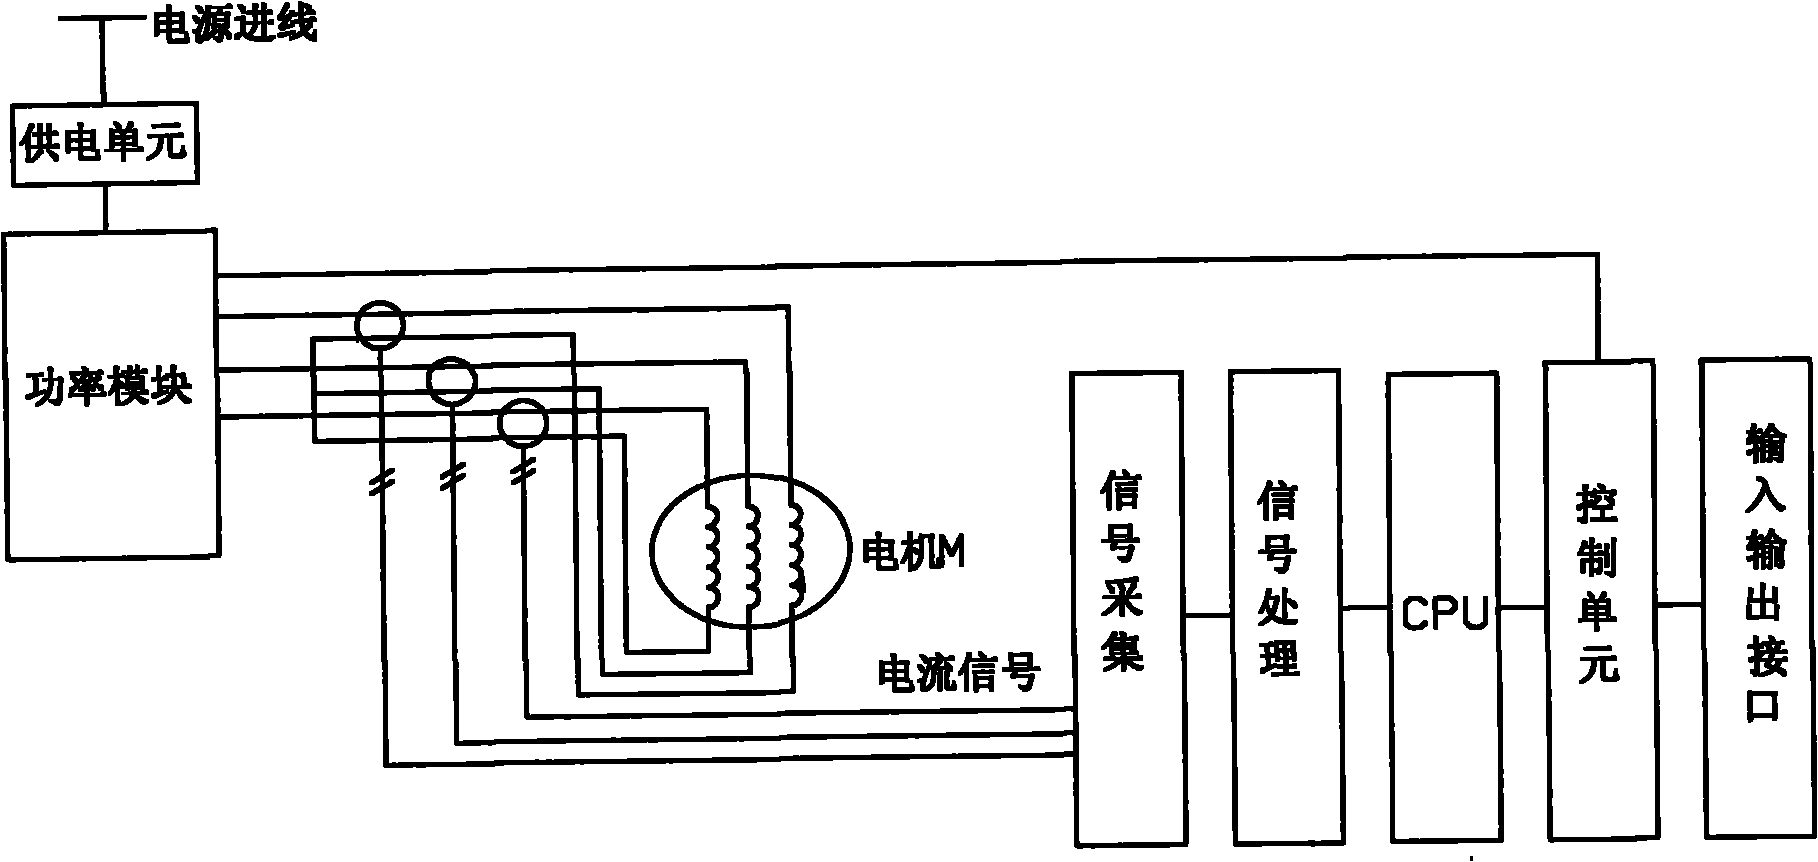 High voltage converter with differential protection